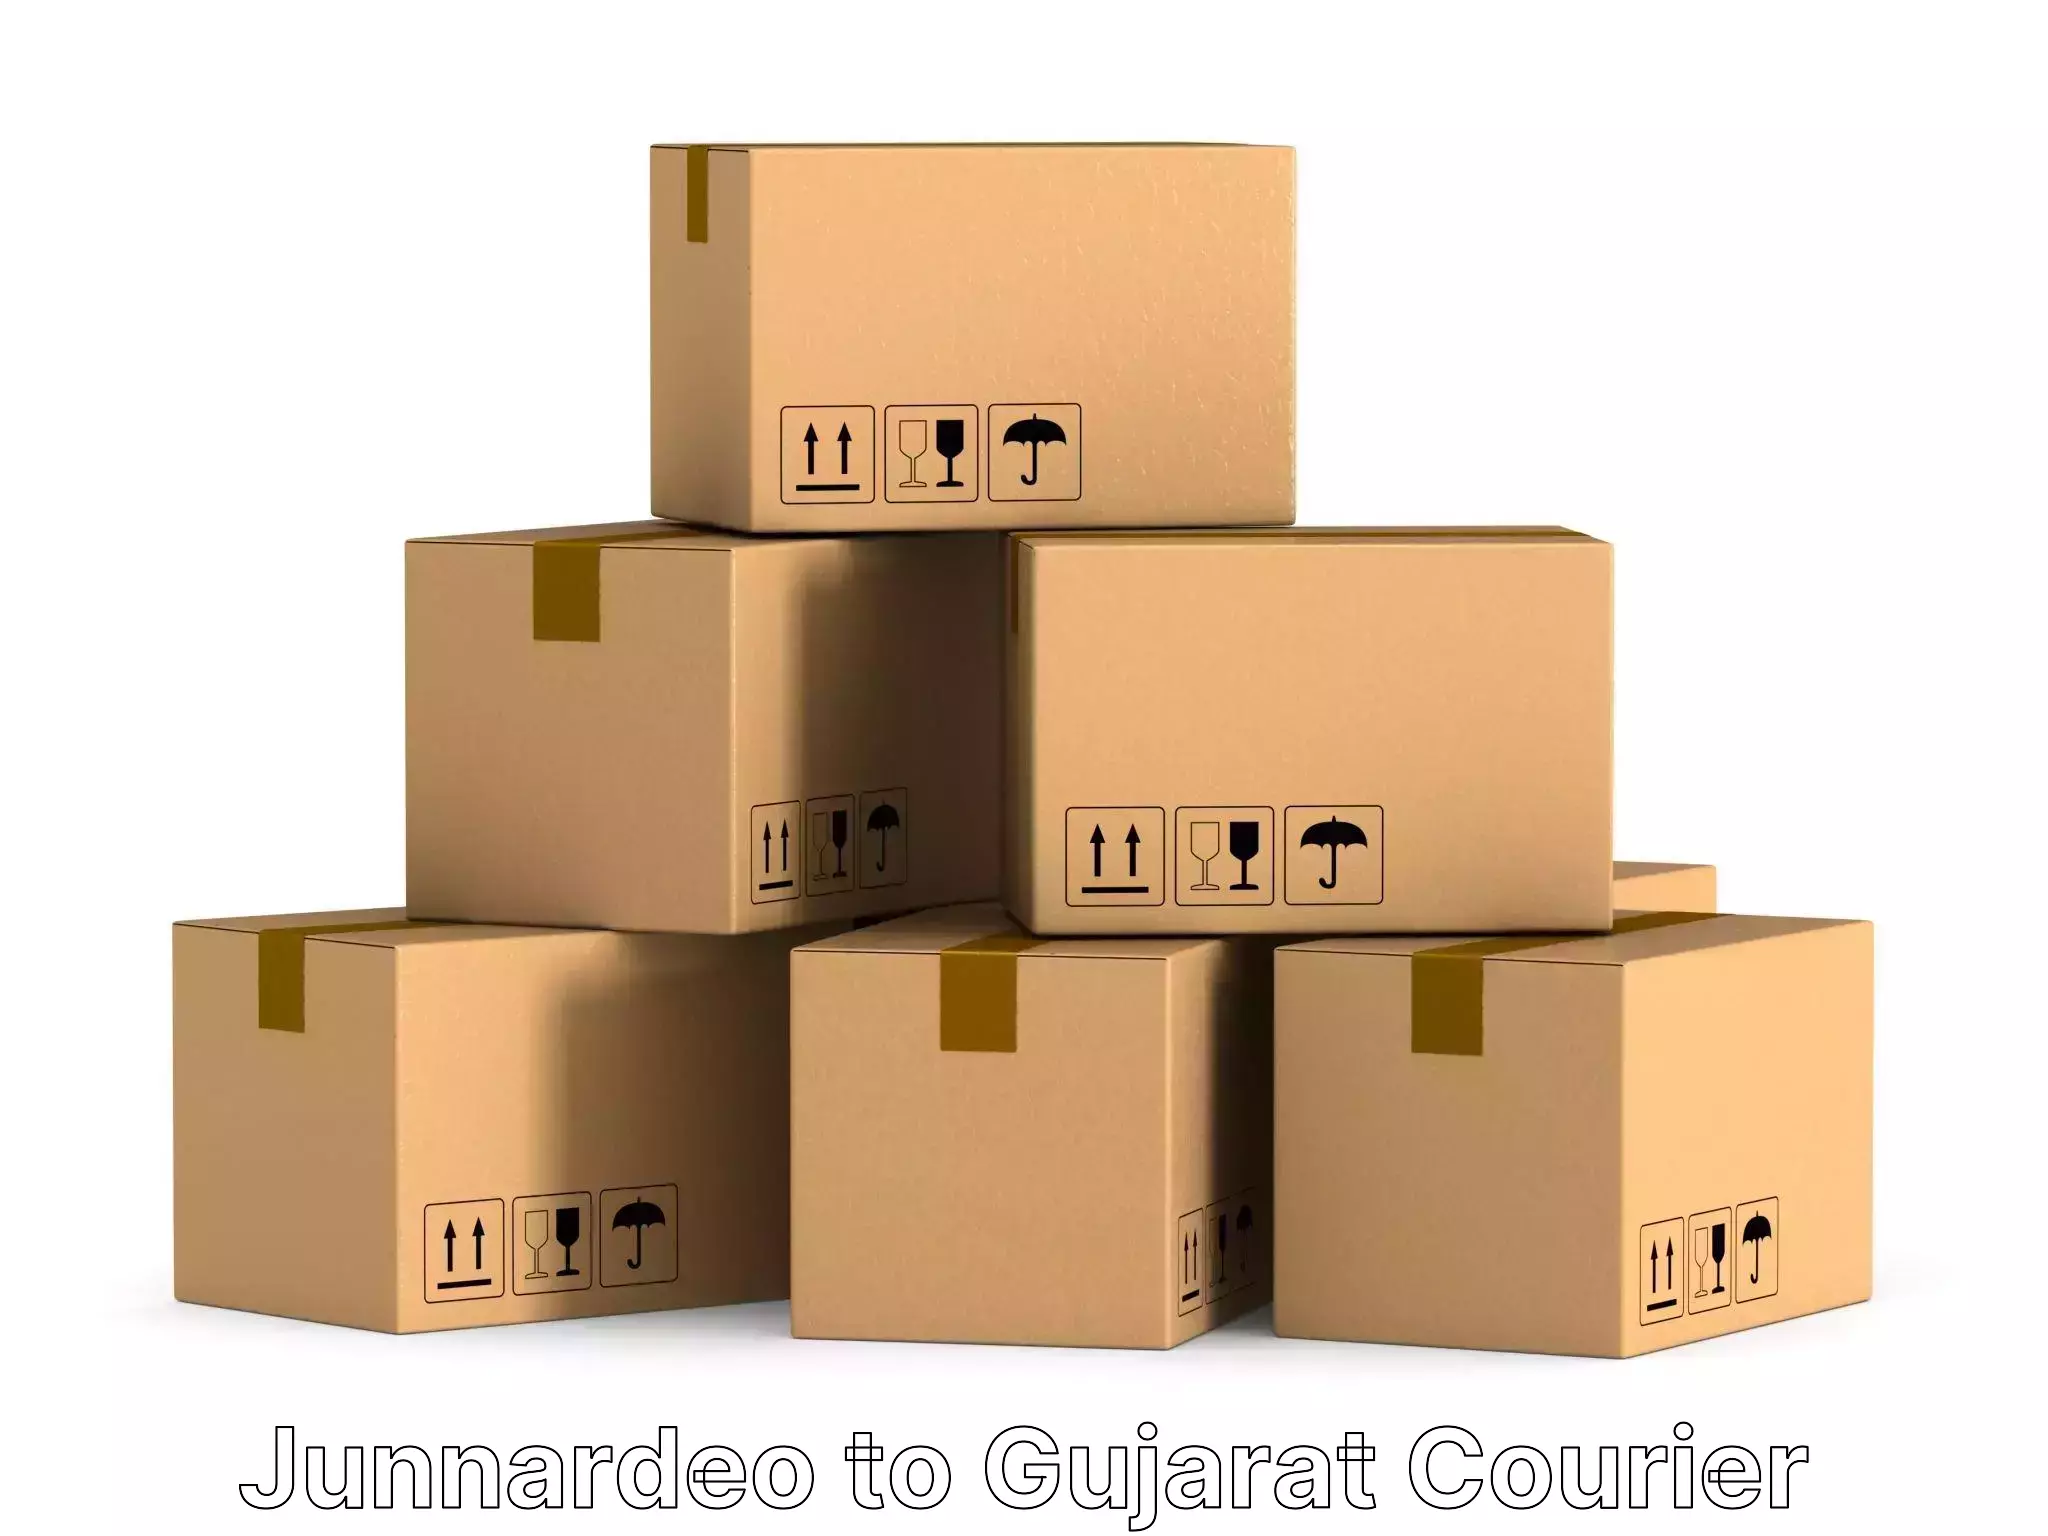 Quality relocation services Junnardeo to Wankaner